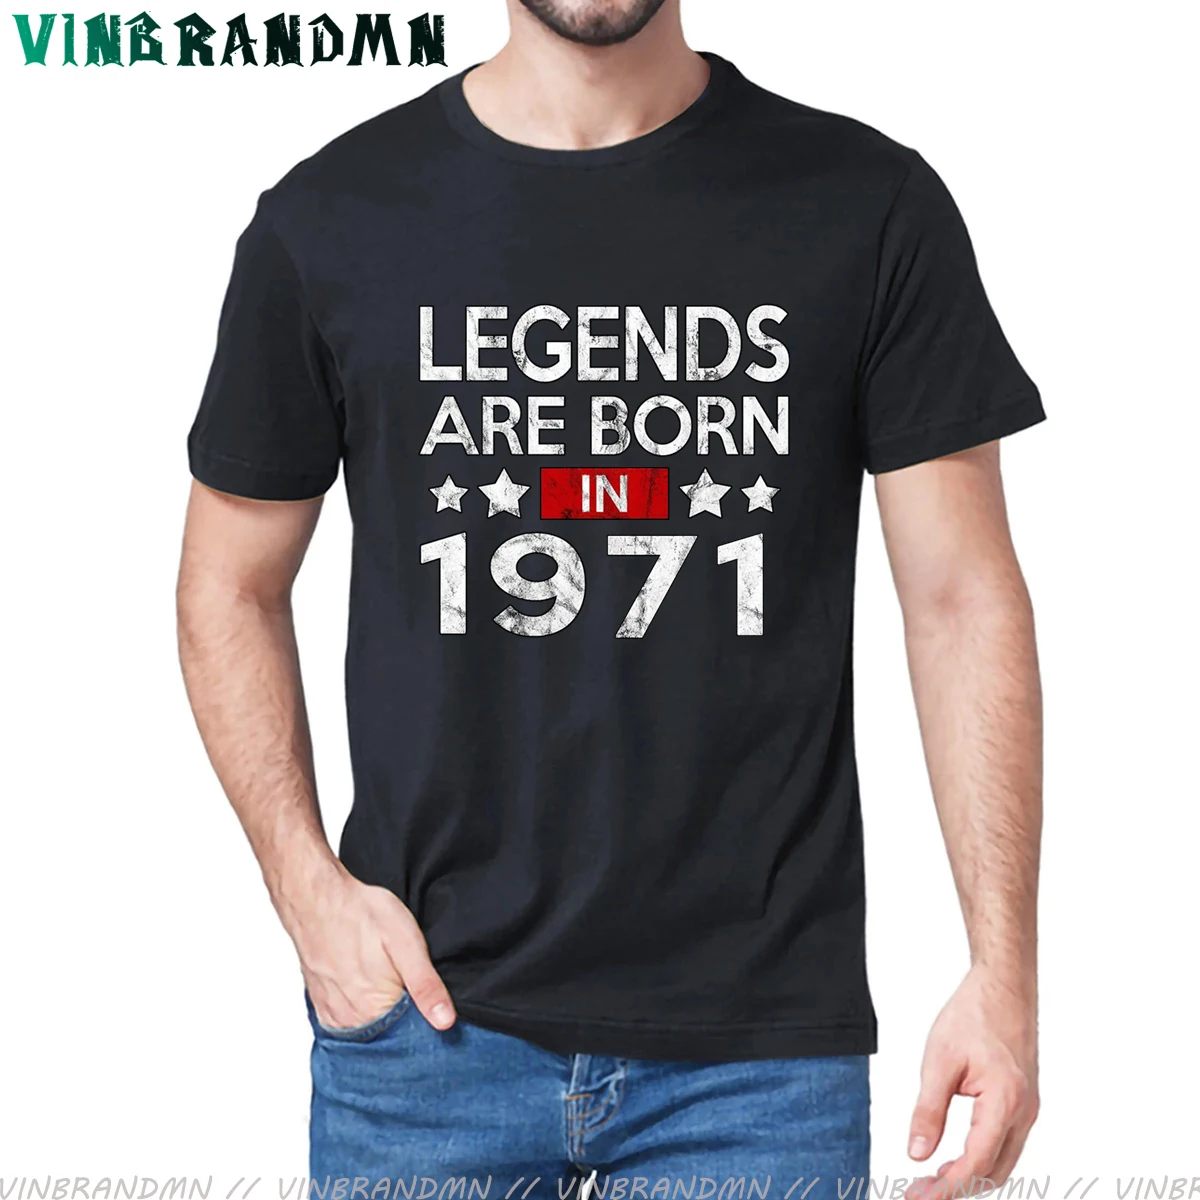 

Legends are born in 1971 T Shirt 50th Dad Father Birthday Gifts Tee Shirts Cool Harajuku Vintage 1971 T-Shirt Short Sleeve Tops